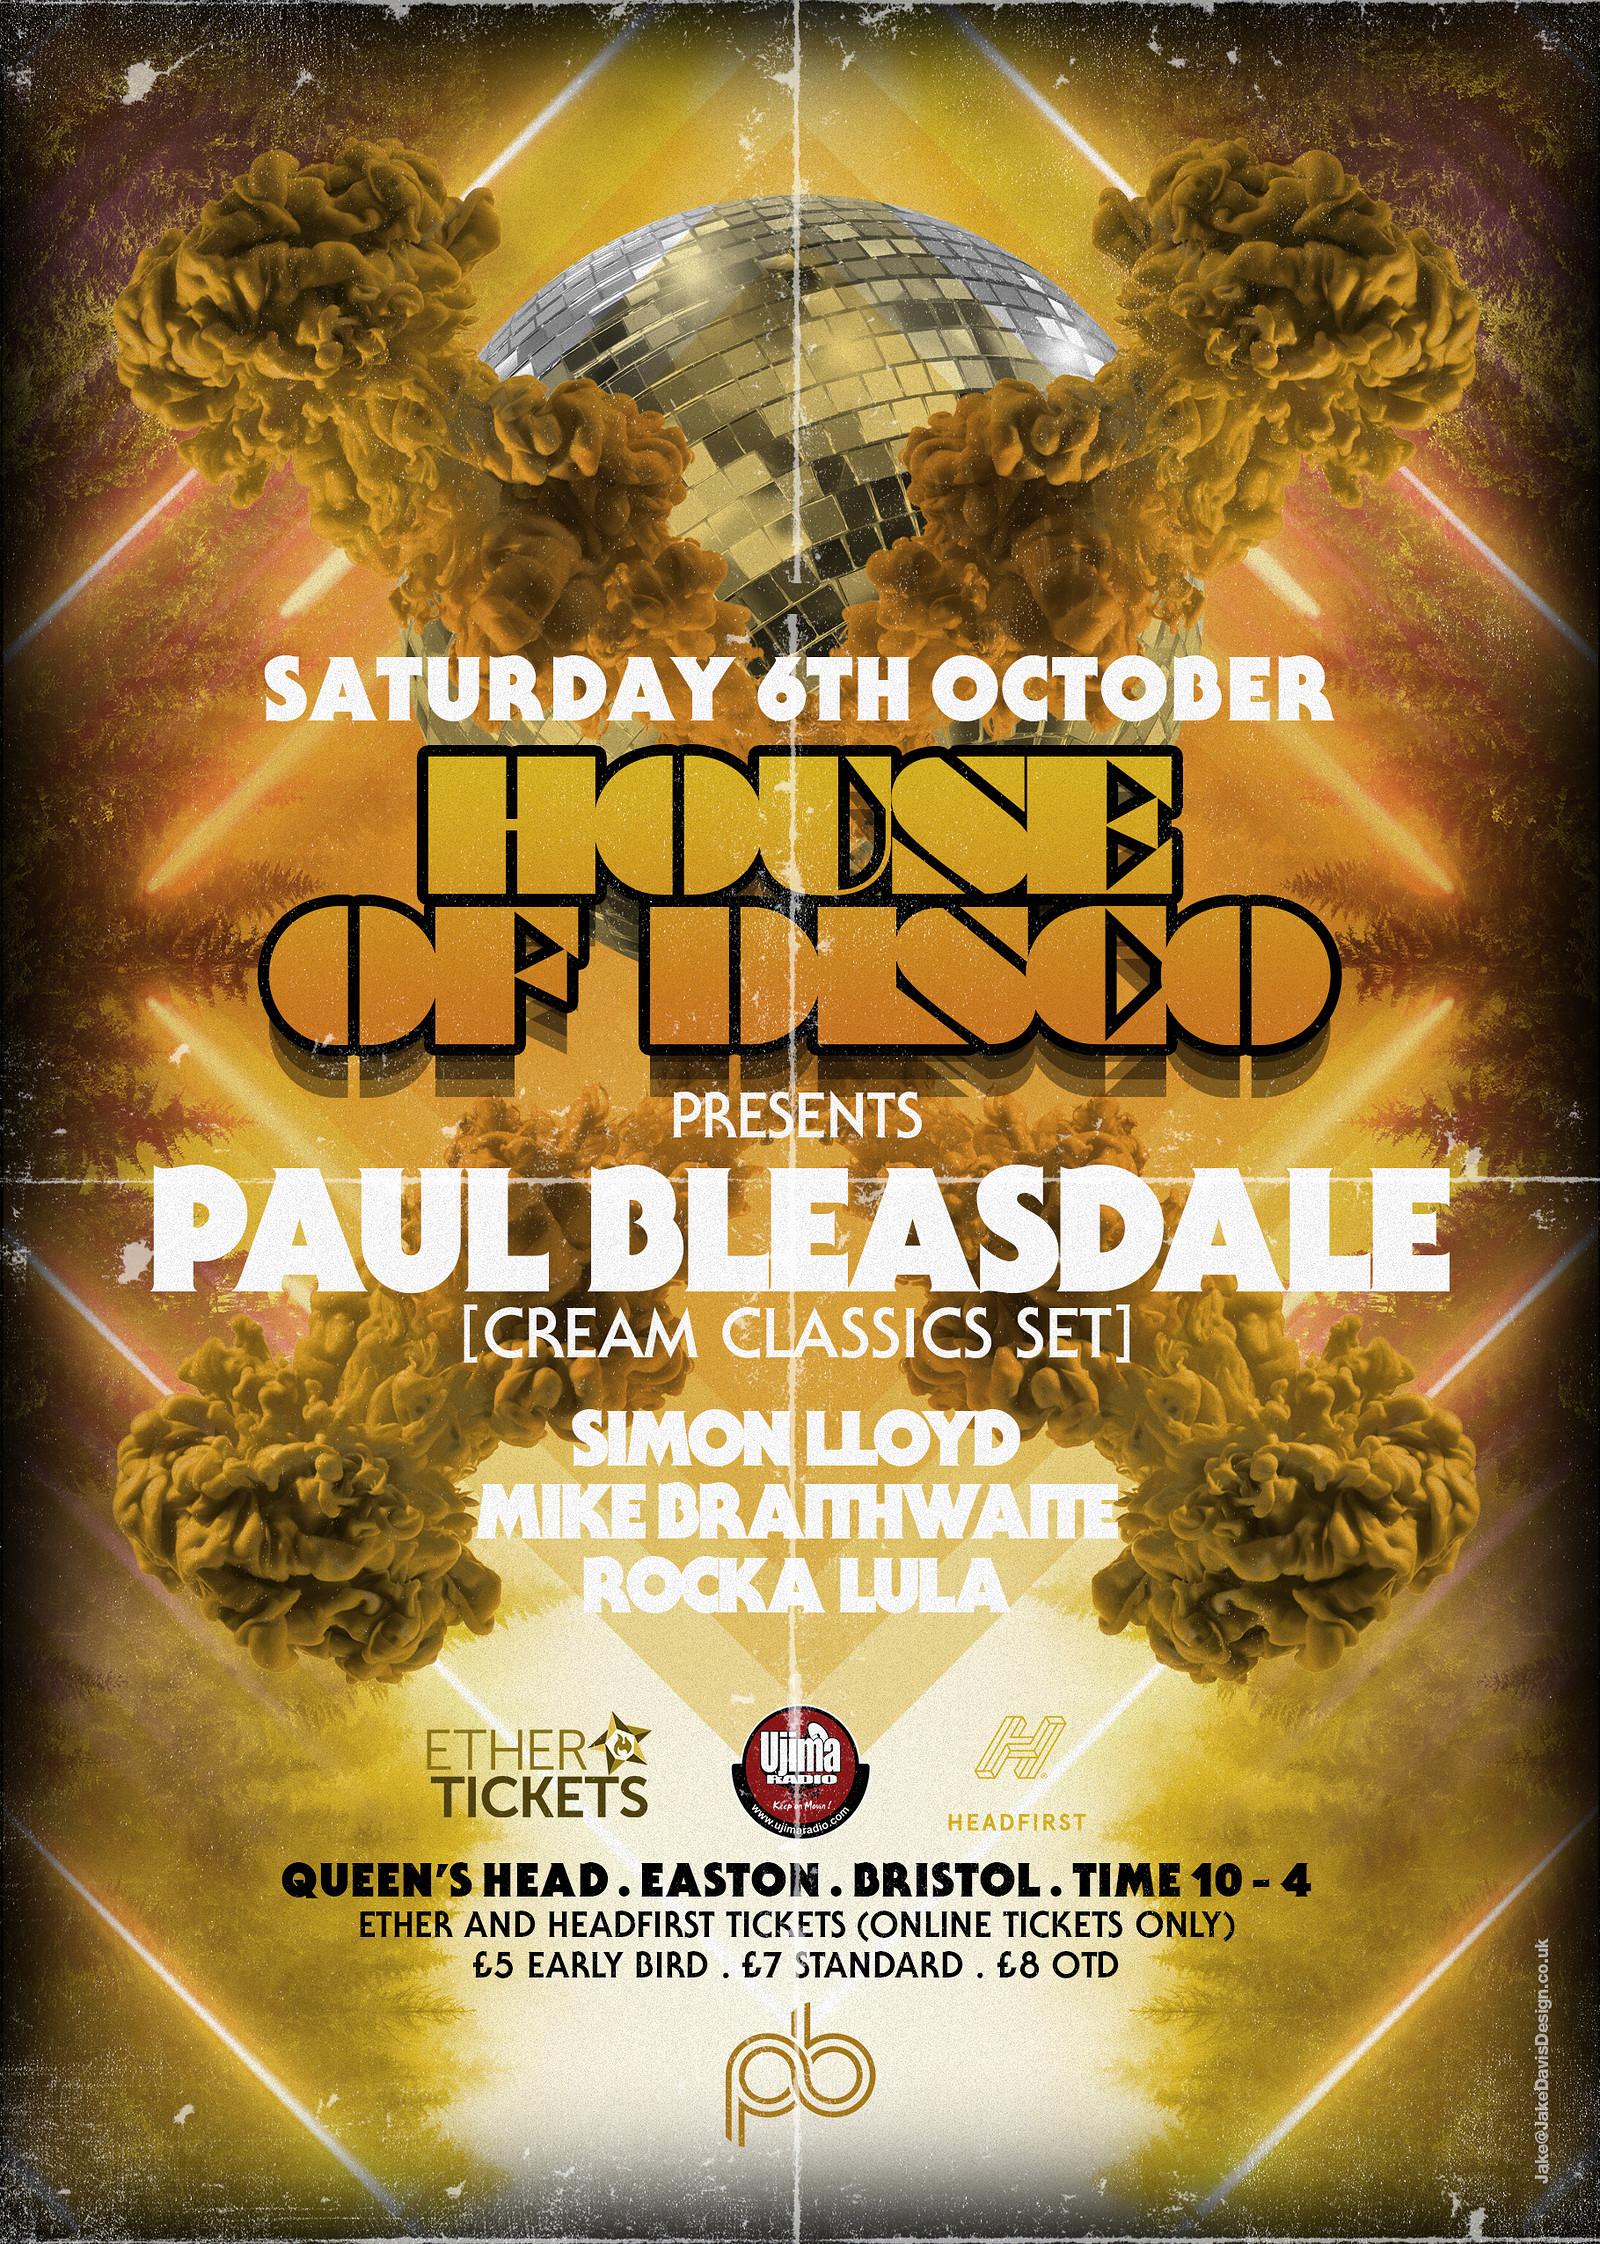 House of Disco presents: Paul Bleasdale at Queens Head Easton